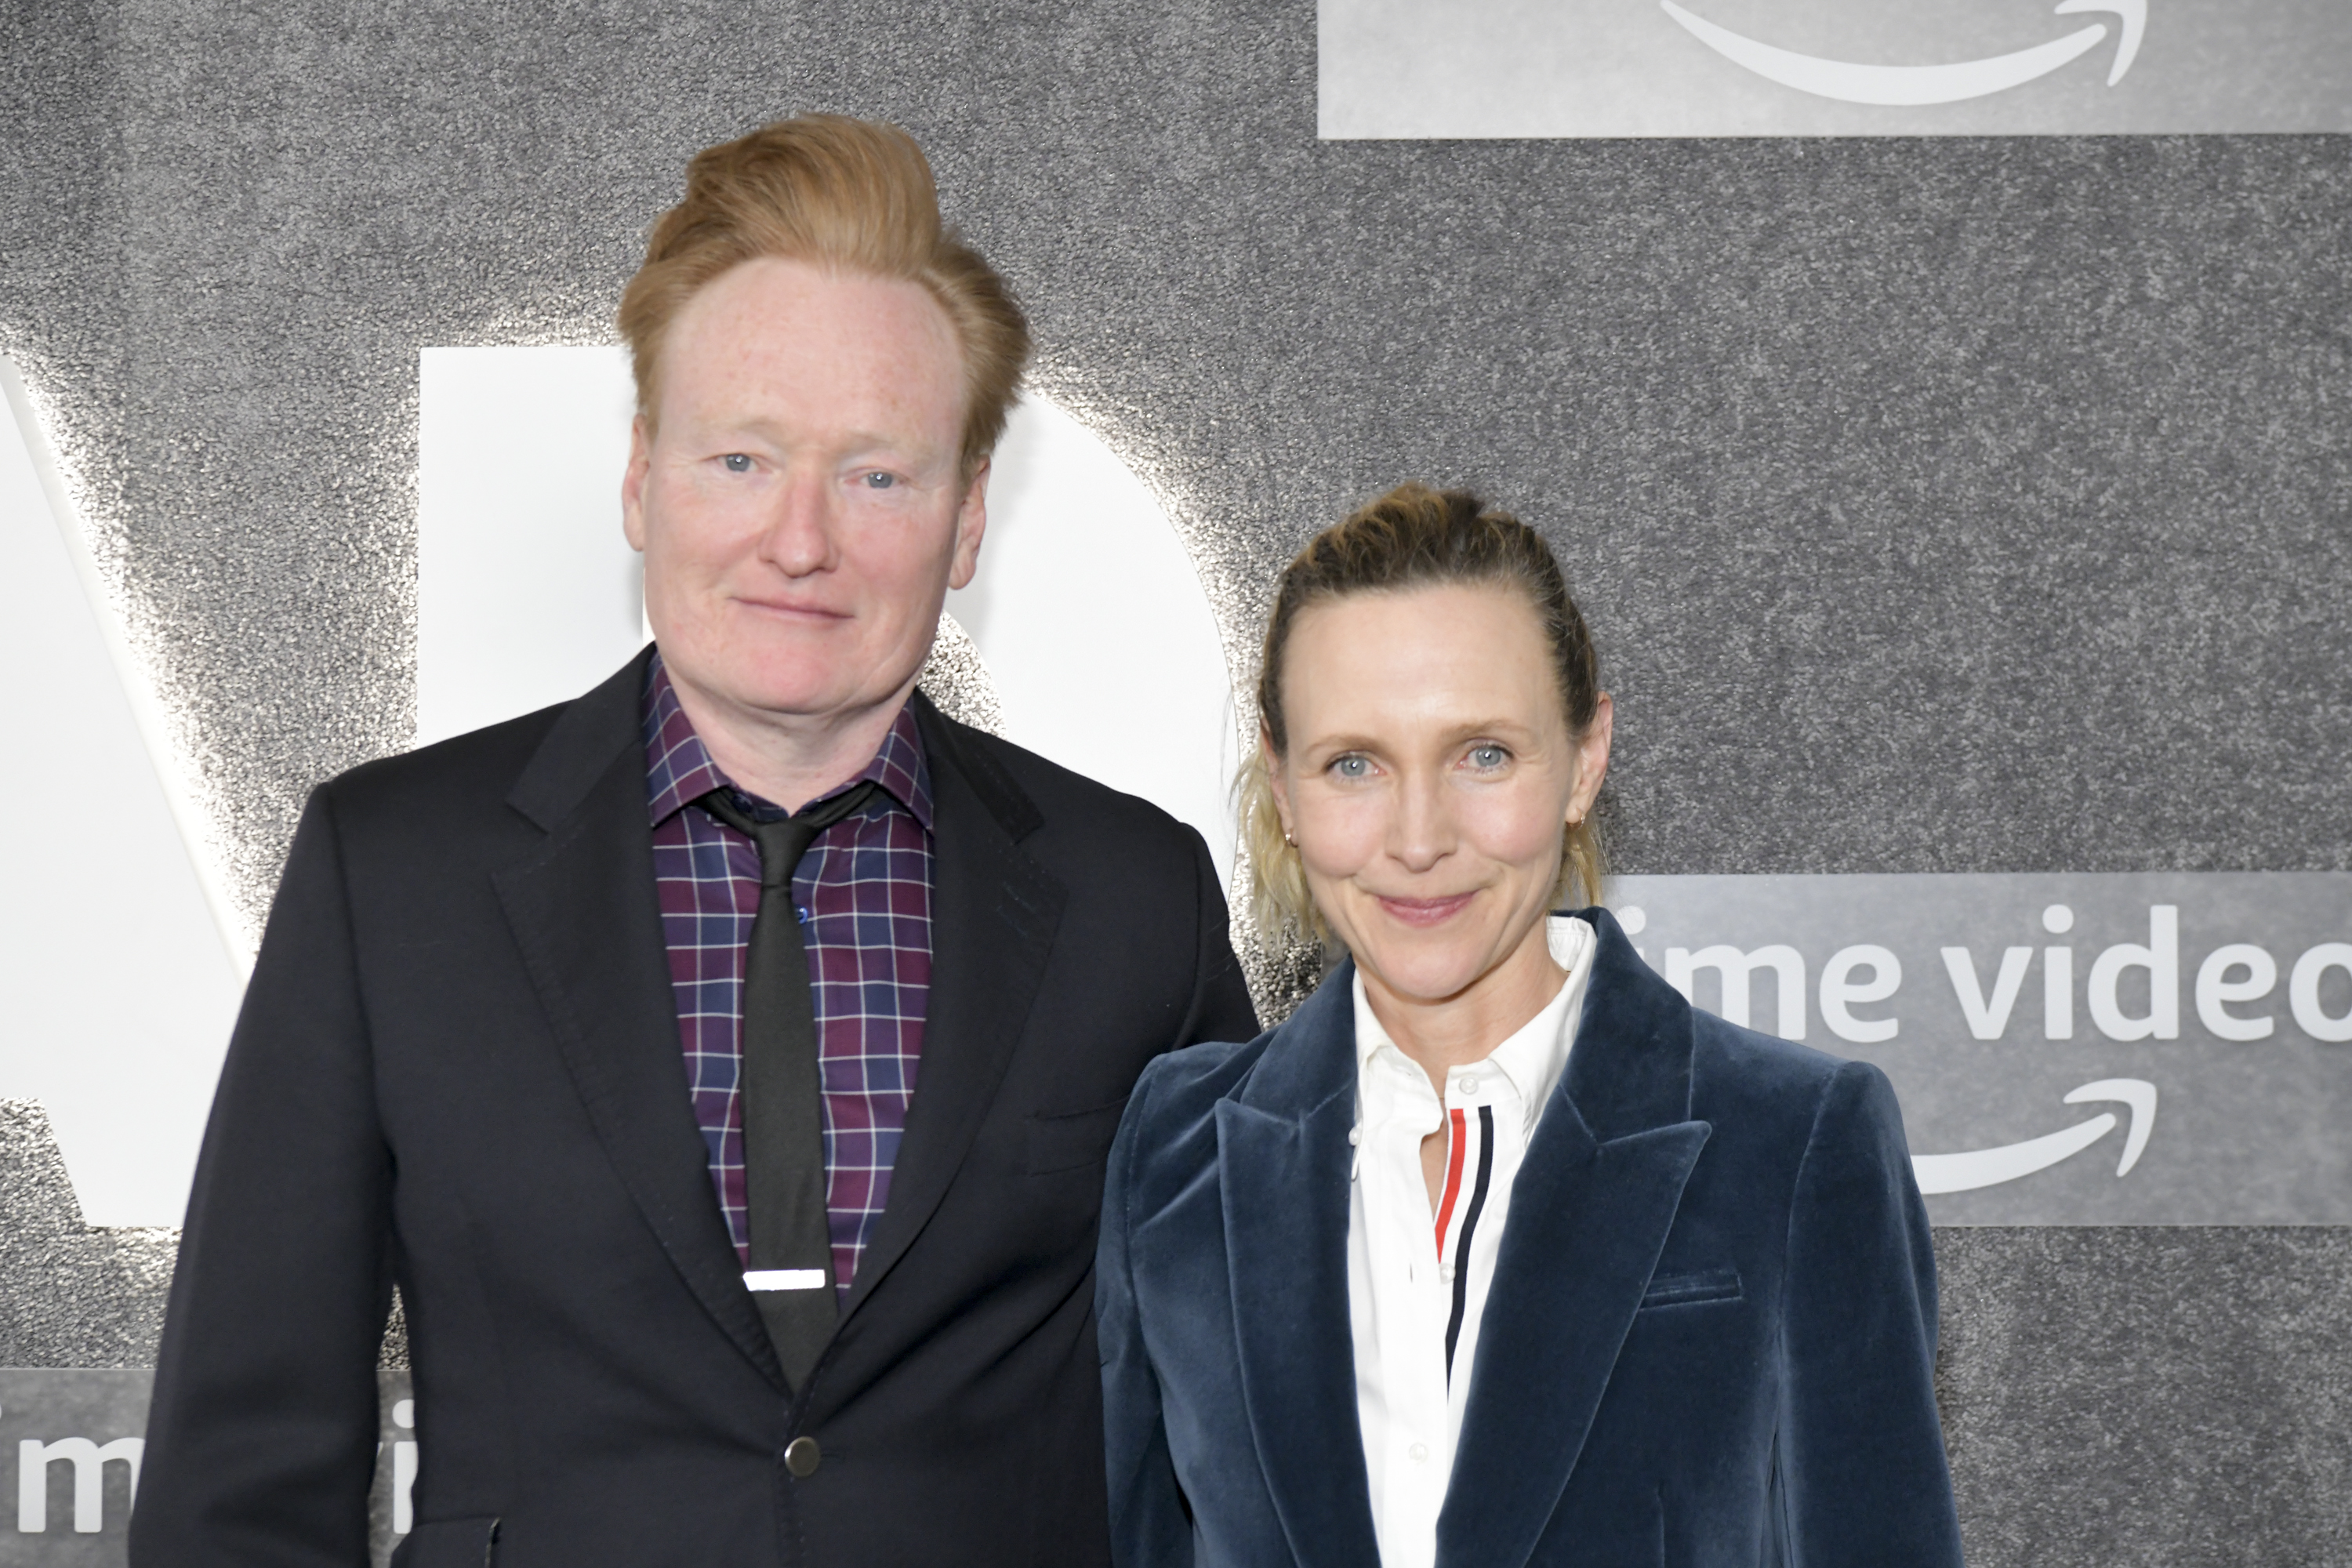 Conan O'Brien and Liza Powel at the Season 2 premiere of "Upload" on March 8, 2022, in West Hollywood | Source: Getty Images